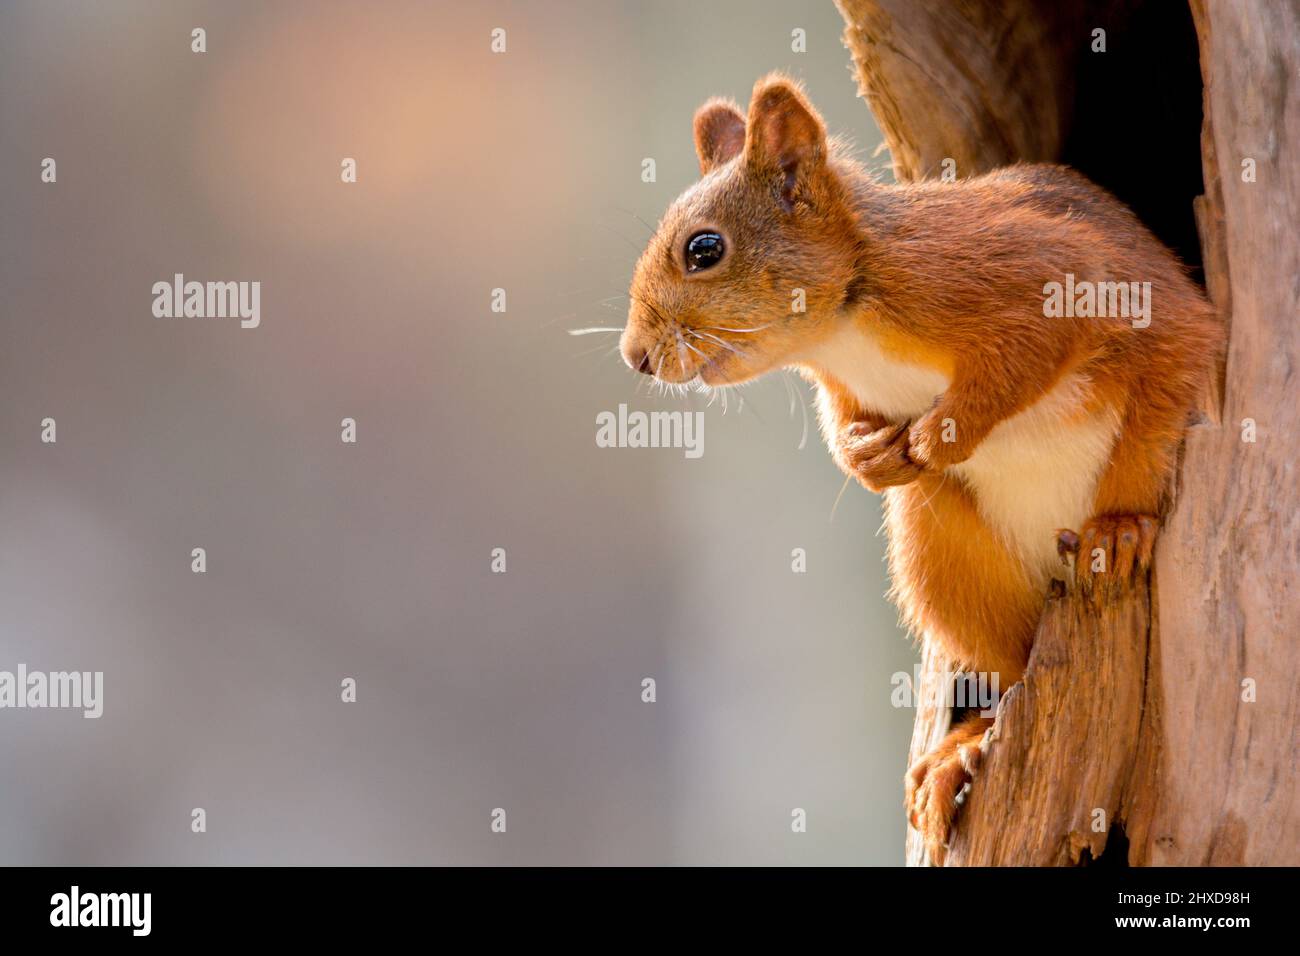 squirrel standing in a hole from a tree trunk Stock Photo